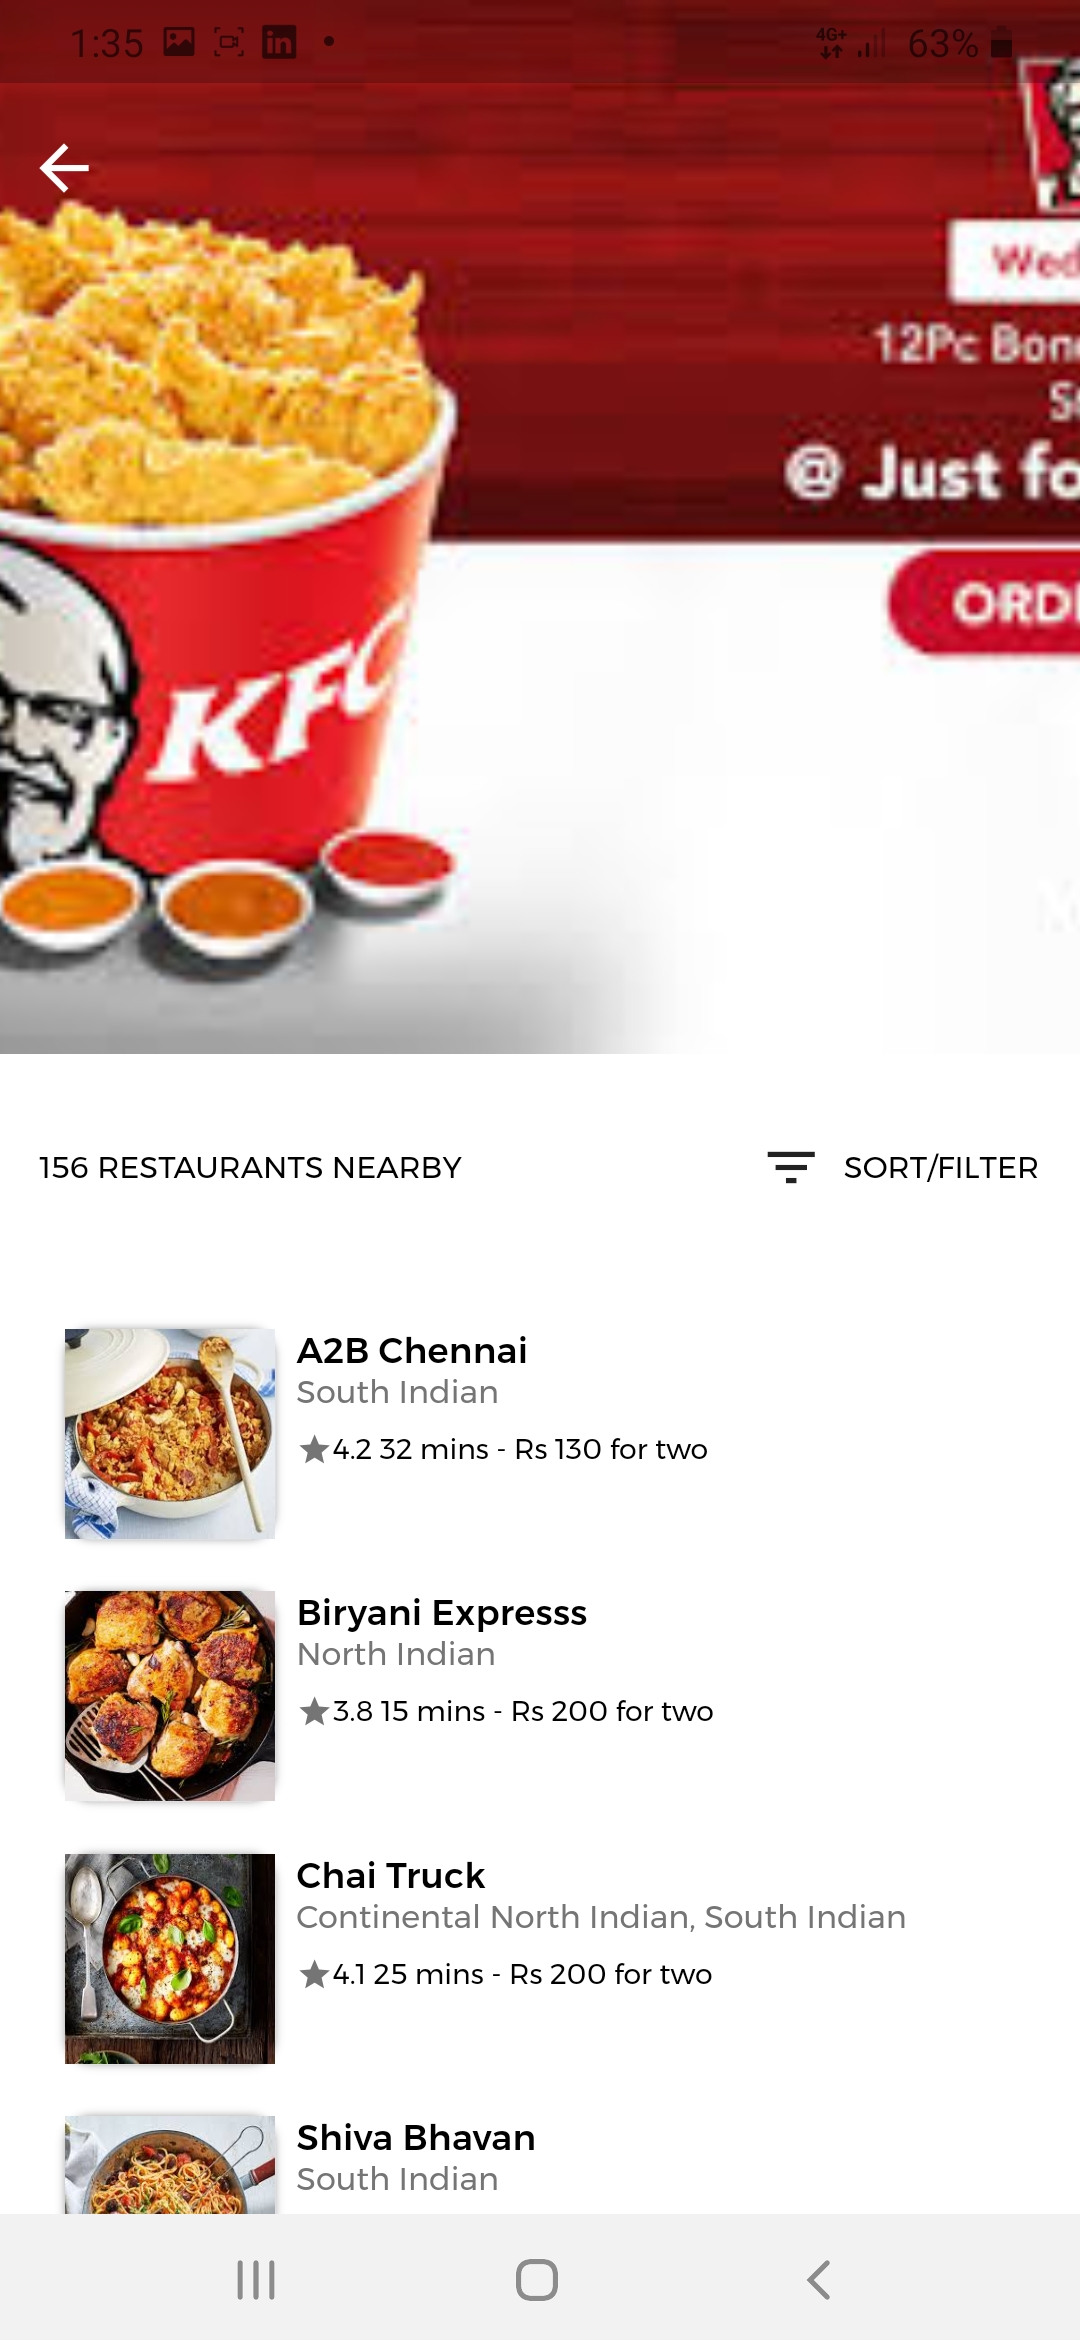 A UI clone of a famous food ordering app called Swiggy built using Flutter